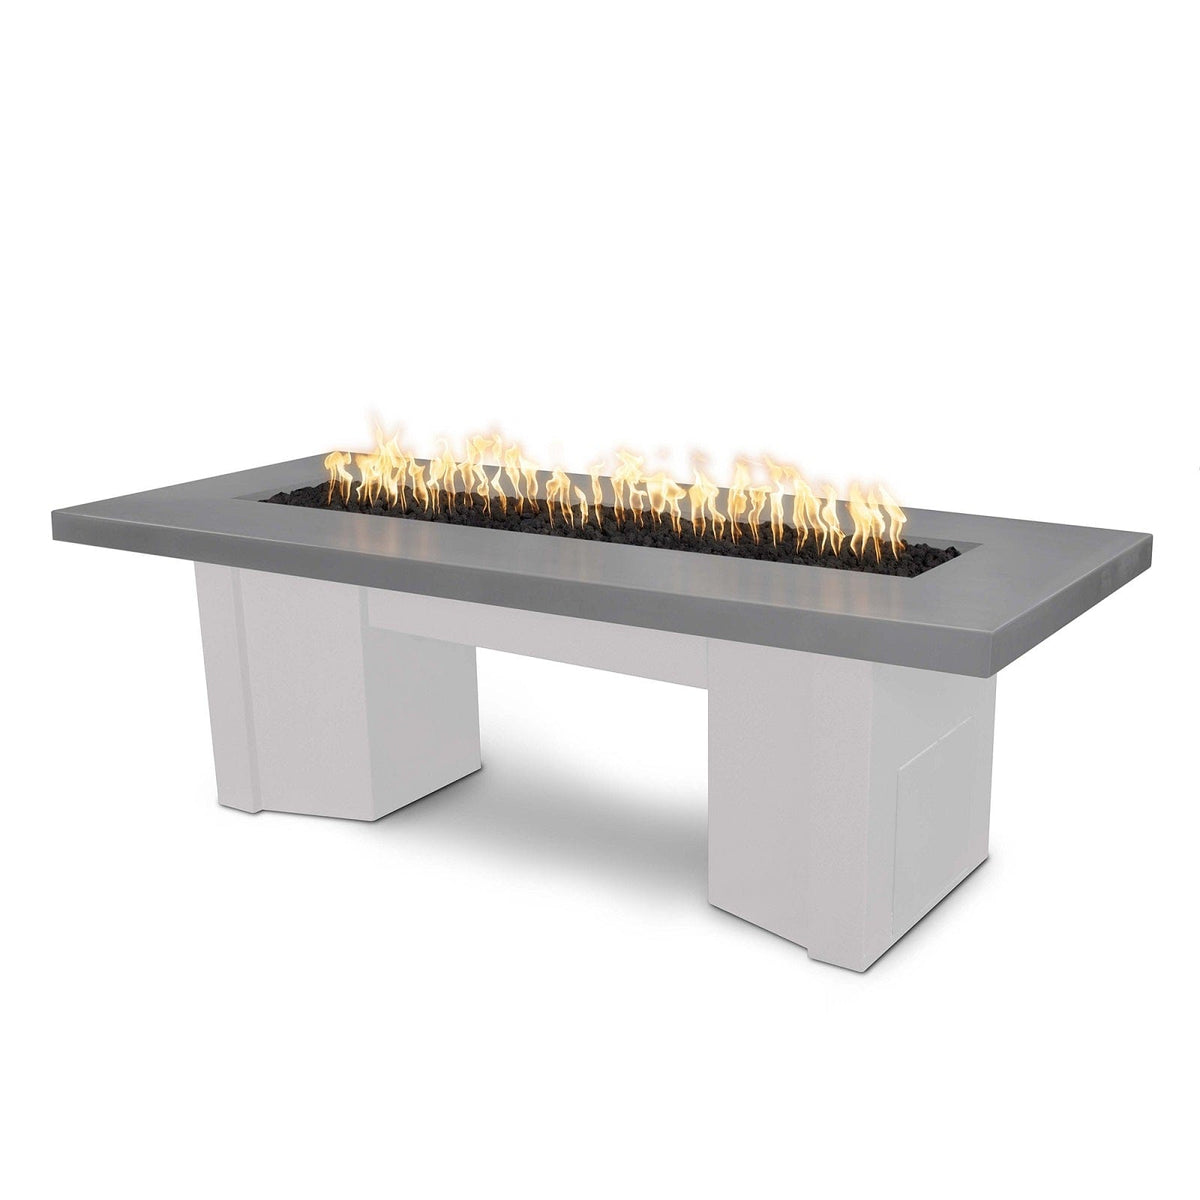 The Outdoor Plus Fire Features Natural Gray (-NGY) / White Powder Coated Steel (-WHT) The Outdoor Plus 60&quot; Alameda Fire Table Smooth Concrete in Liquid Propane - Match Lit with Flame Sense System / OPT-ALMGFRC60FSML-LP